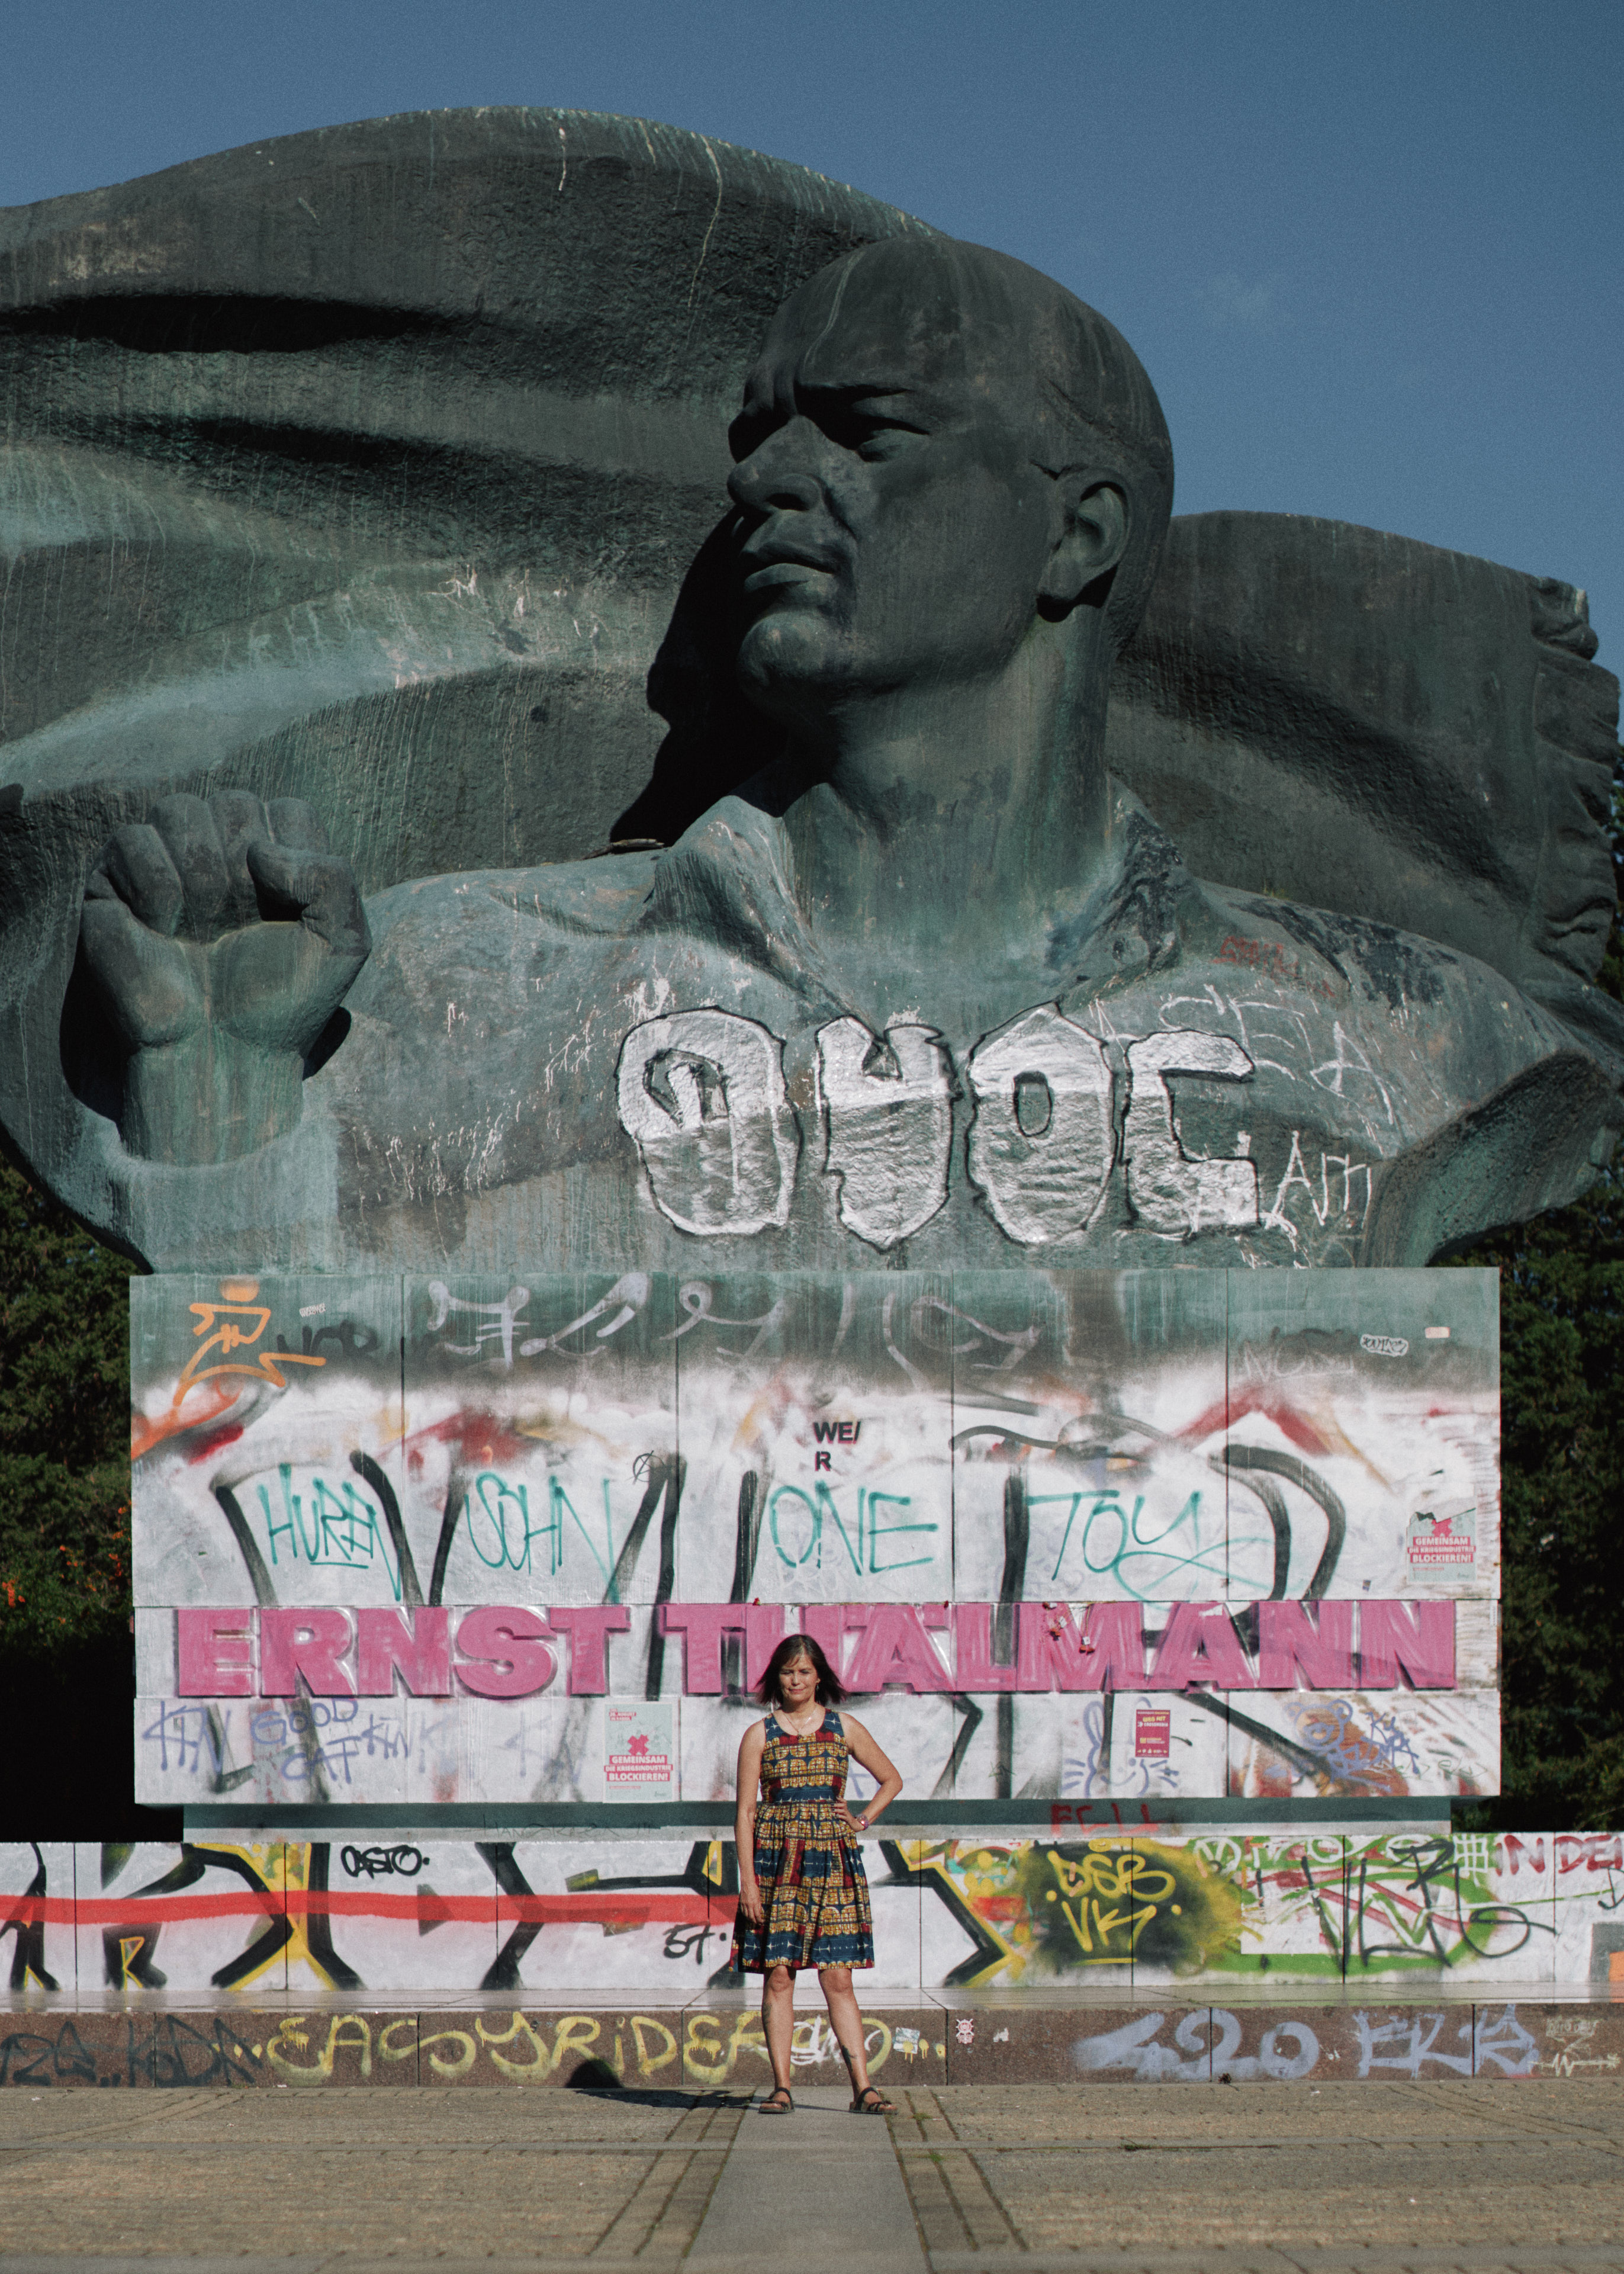 Maria in front of a monument to Ernst Thälmann